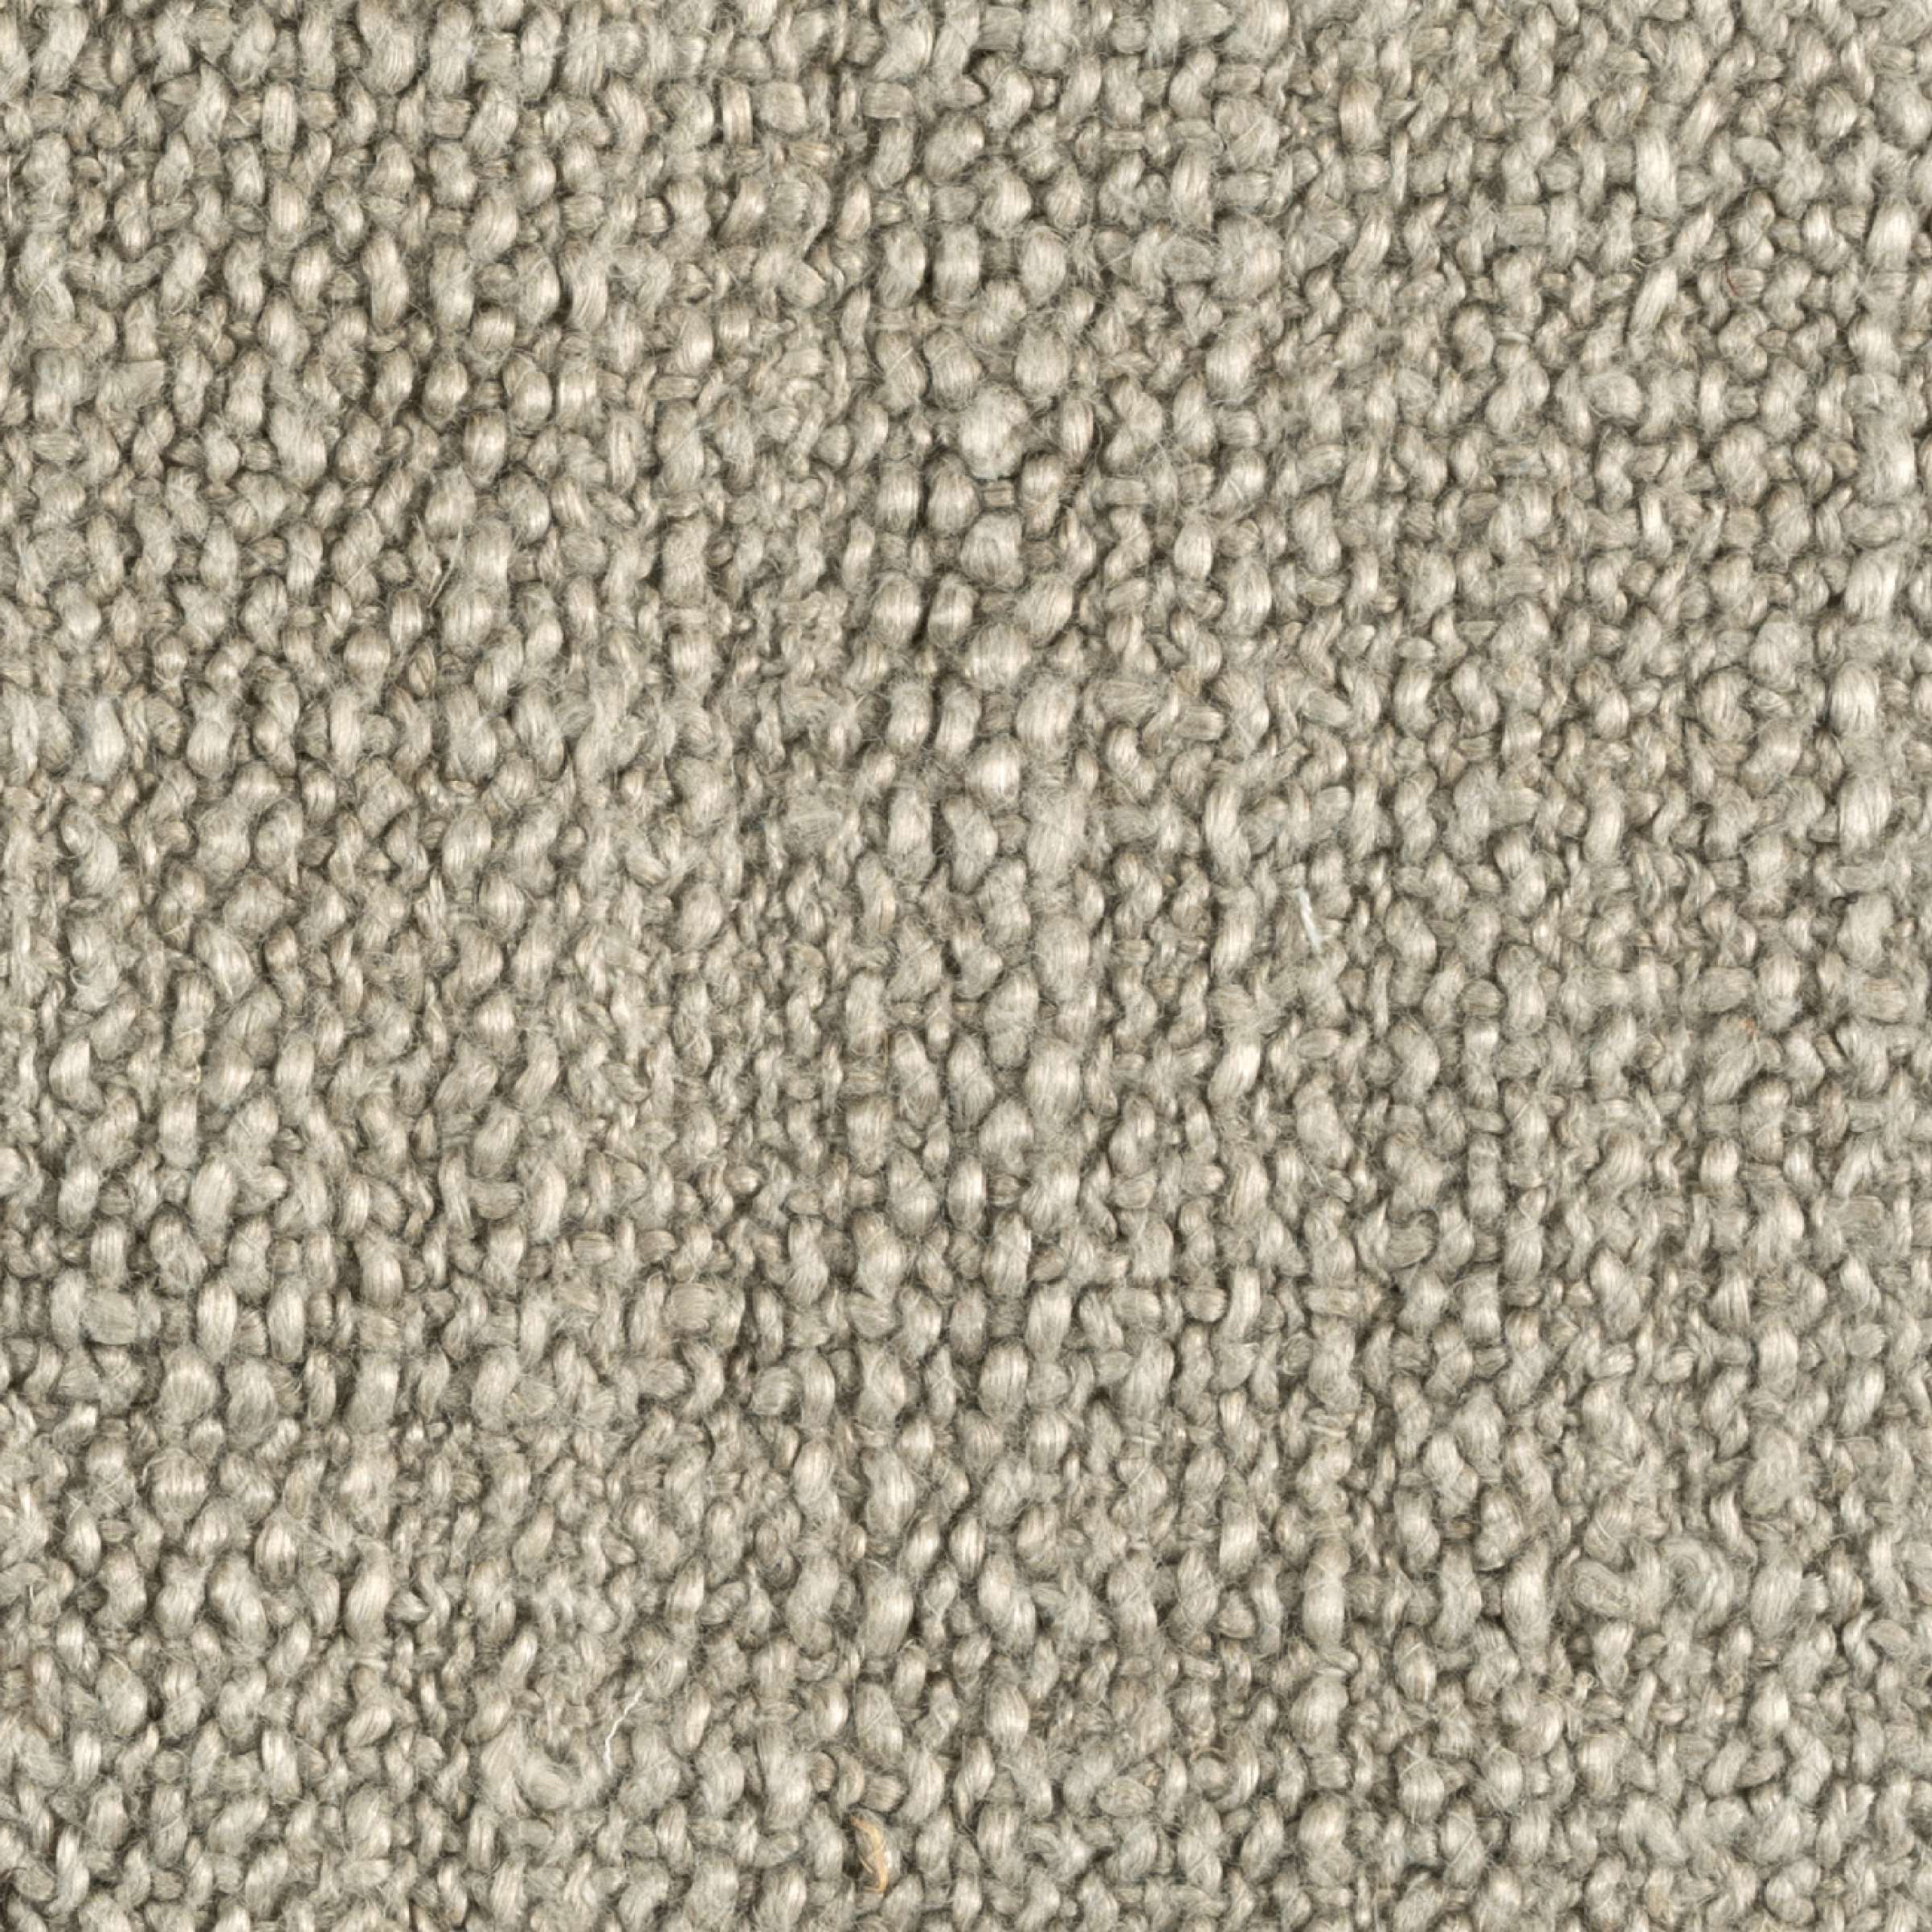 Stretch lining light taupe, Remnant piece 192cm